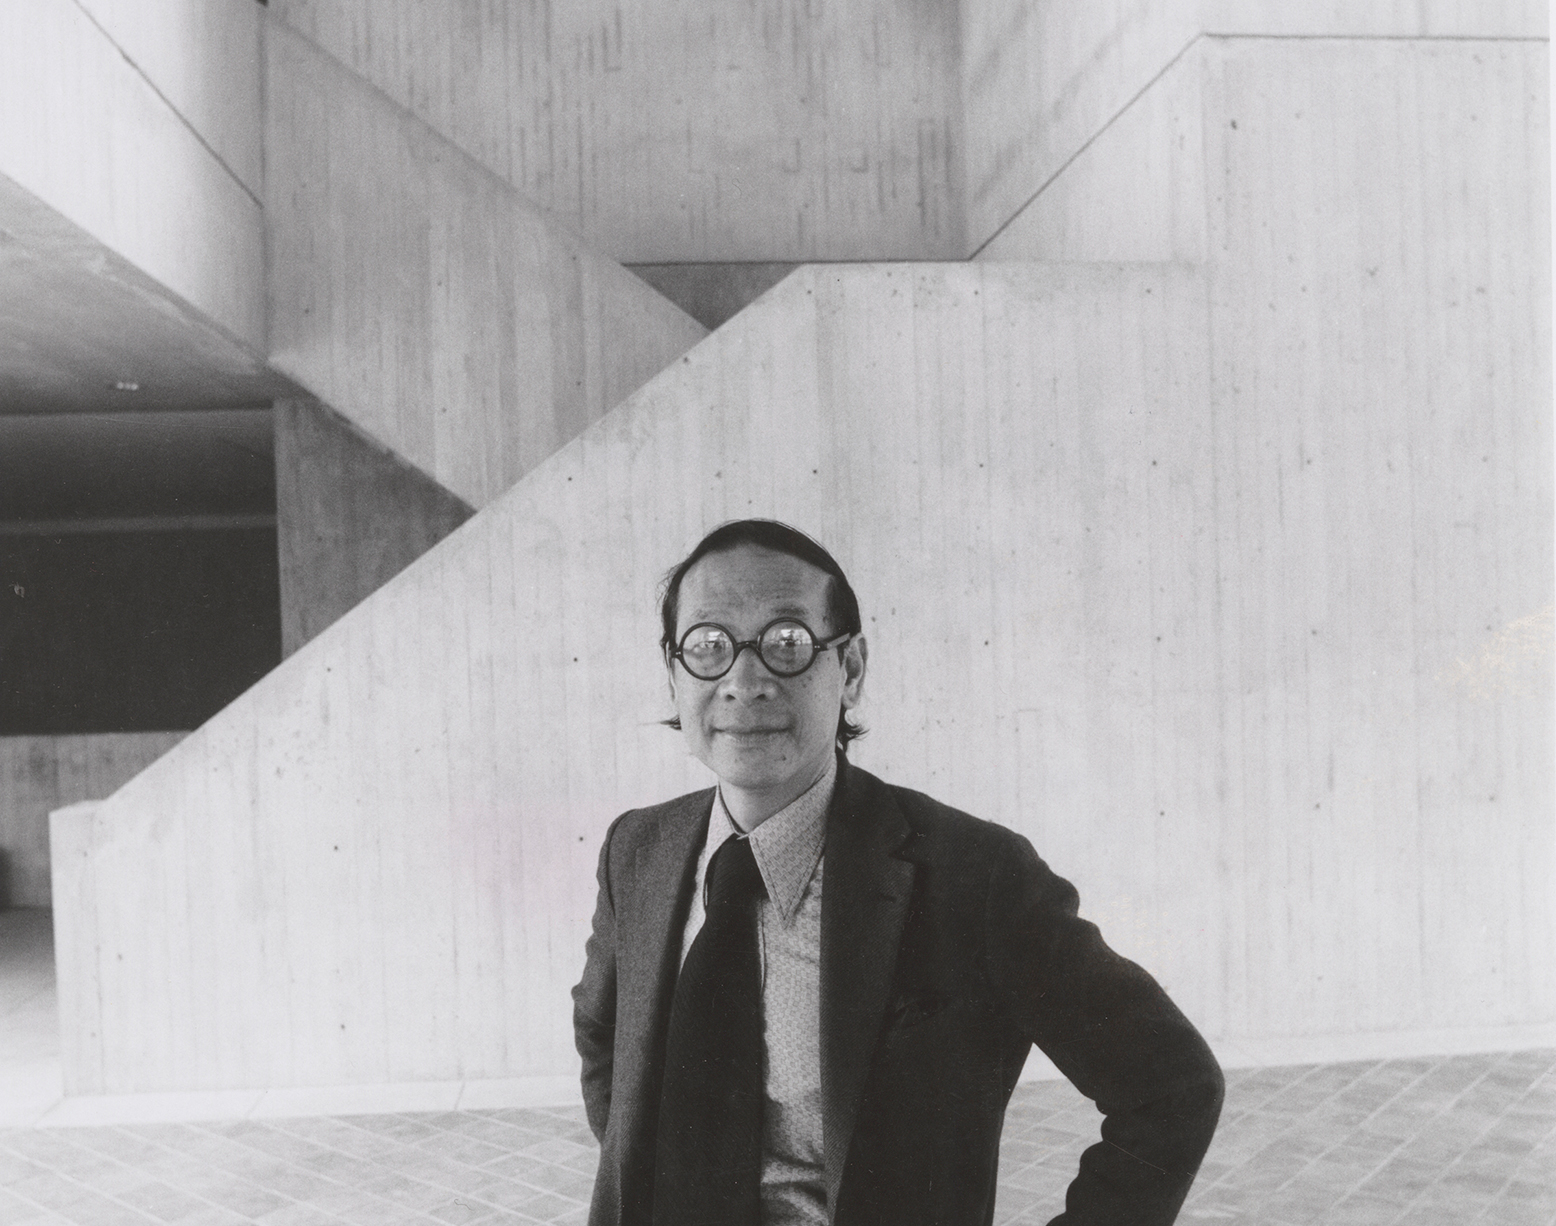 A black and white photo of Chinese American architect Ieoh Ming (I.M.) Pei standing in the lobby he designed of the Herbert F. Johnson Museum of Art, which has tall, angular concrete forms.